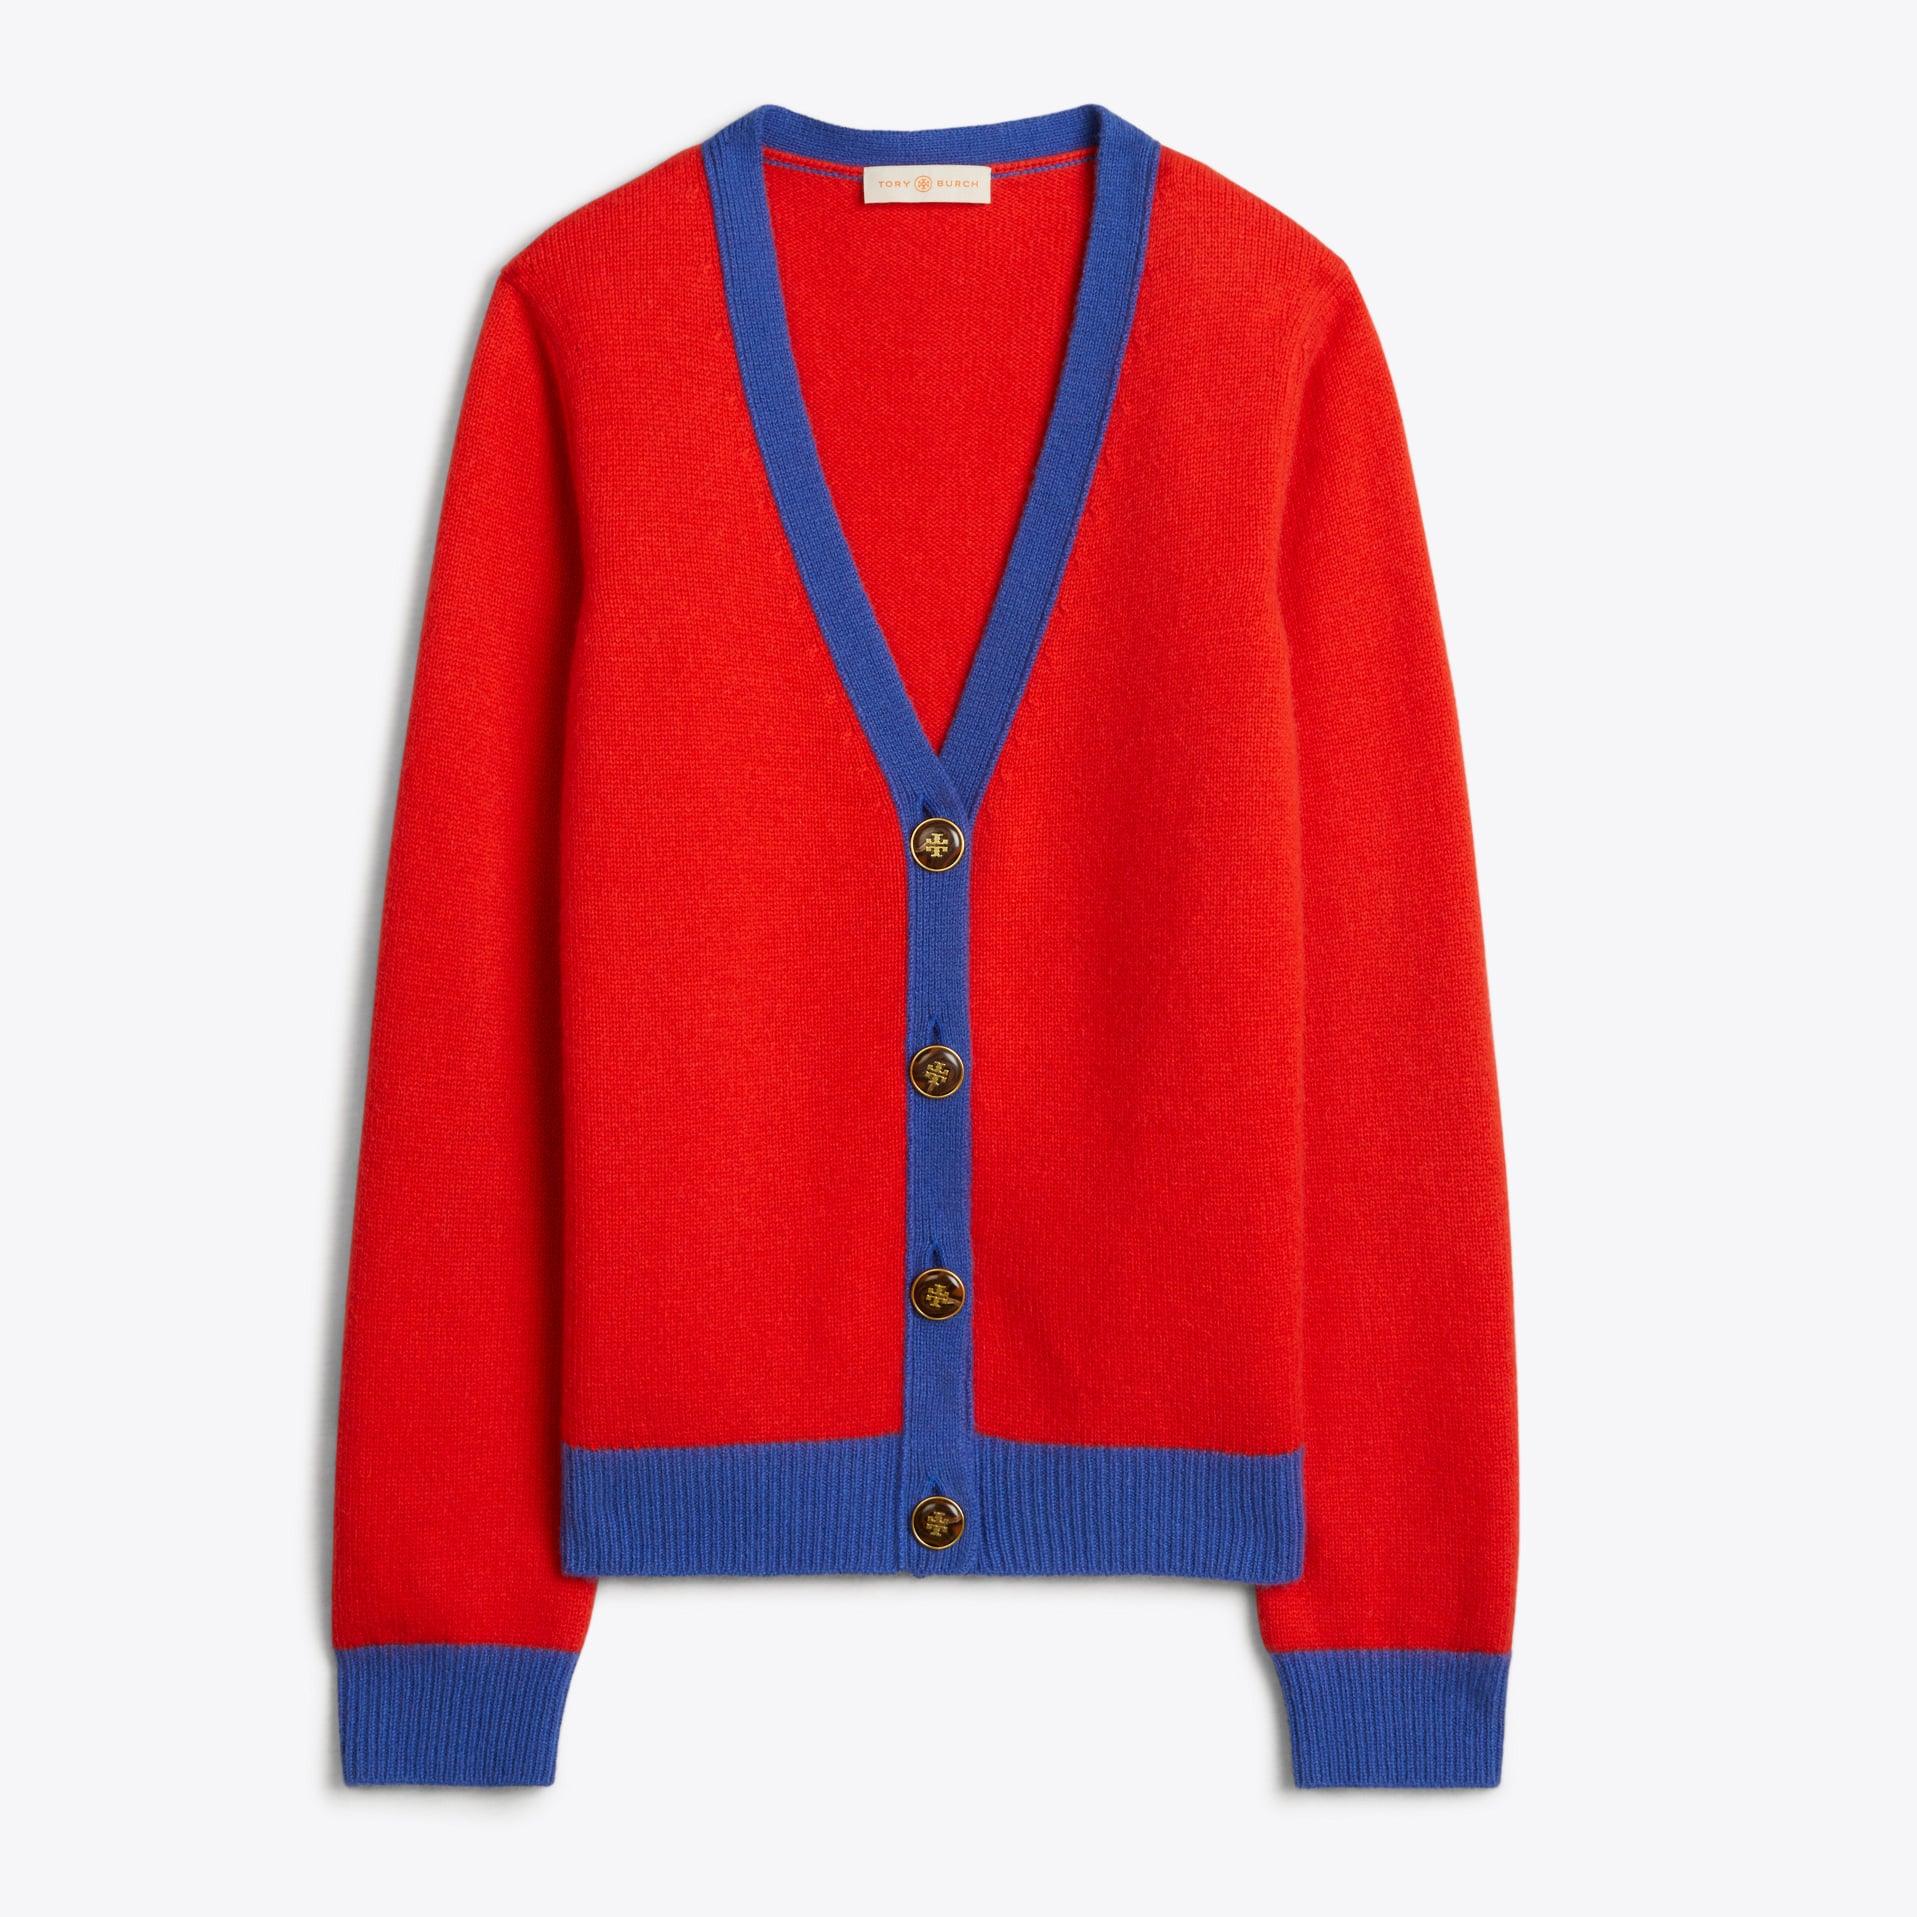 Tory Burch | The Most Popular Sweater Trend For Fall | POPSUGAR Fashion  Photo 24